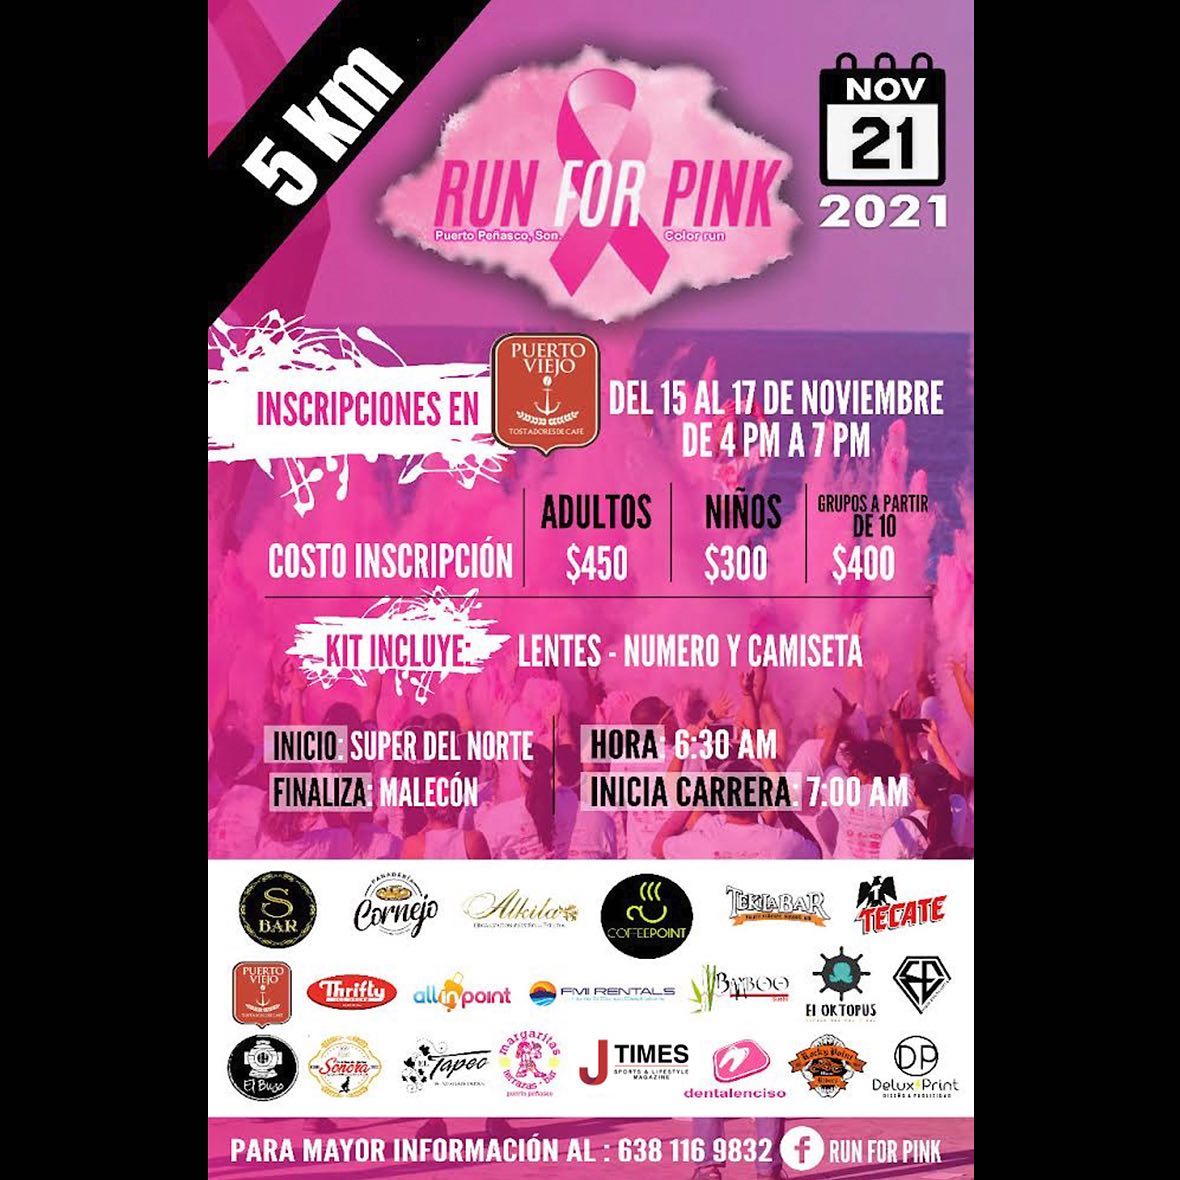 Run-for-pink-updated Run for Pink Carrera con Causa